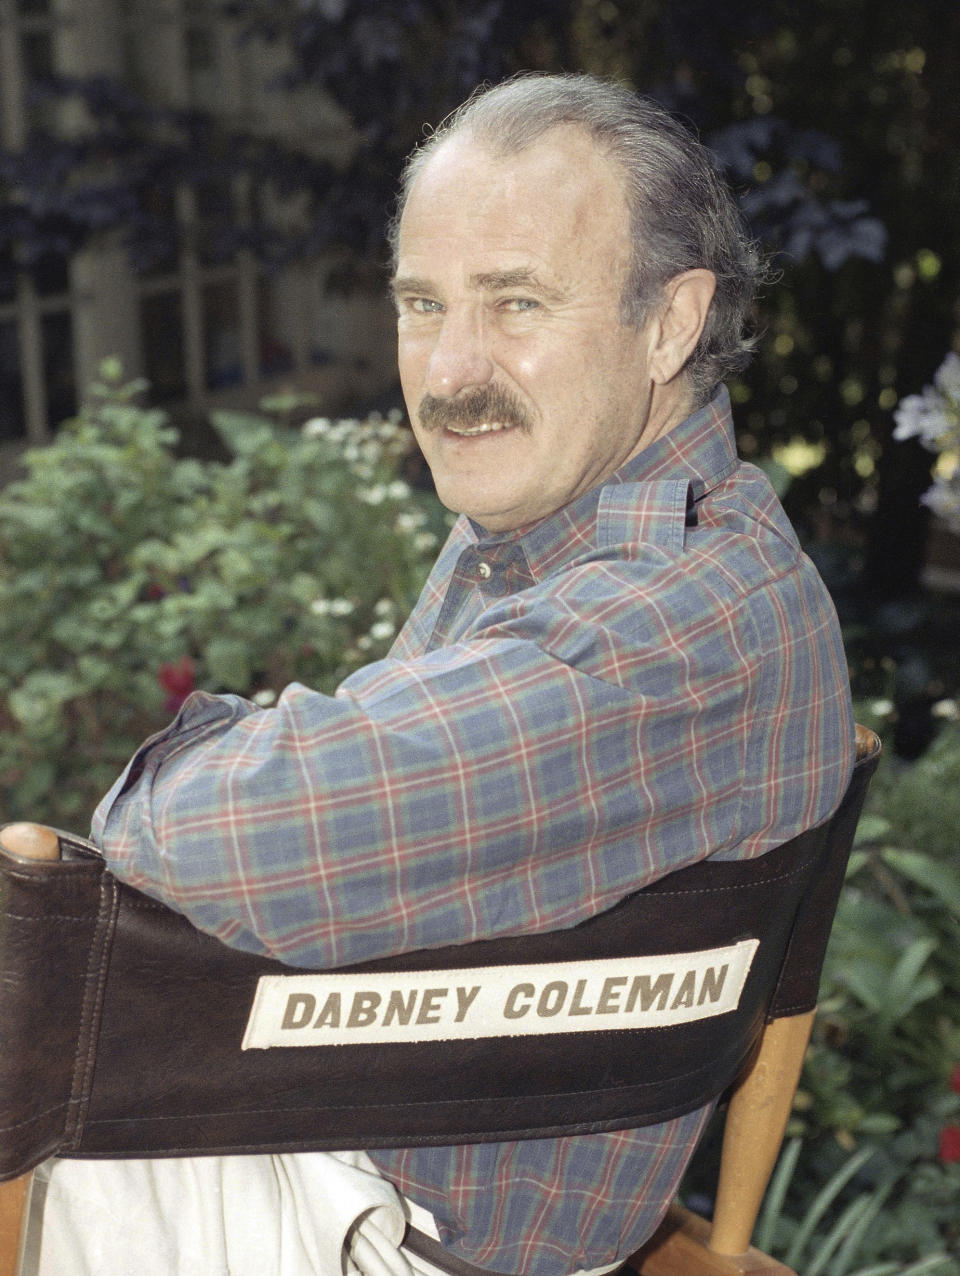 FILE - Actor Dabney Coleman poses at his home in Brentwood, Calif., Sept. 8, 1991. Coleman, the mustachioed character actor who specialized in smarmy villains like the chauvinist boss in "9 to 5" and the nasty TV director in "Tootsie," died Thursday, May 16, 2024, his daughter, Quincy Coleman, told The Hollywood Reporter. He was 92. No other details were immediately available. (AP Photo/Julie Markes, File)